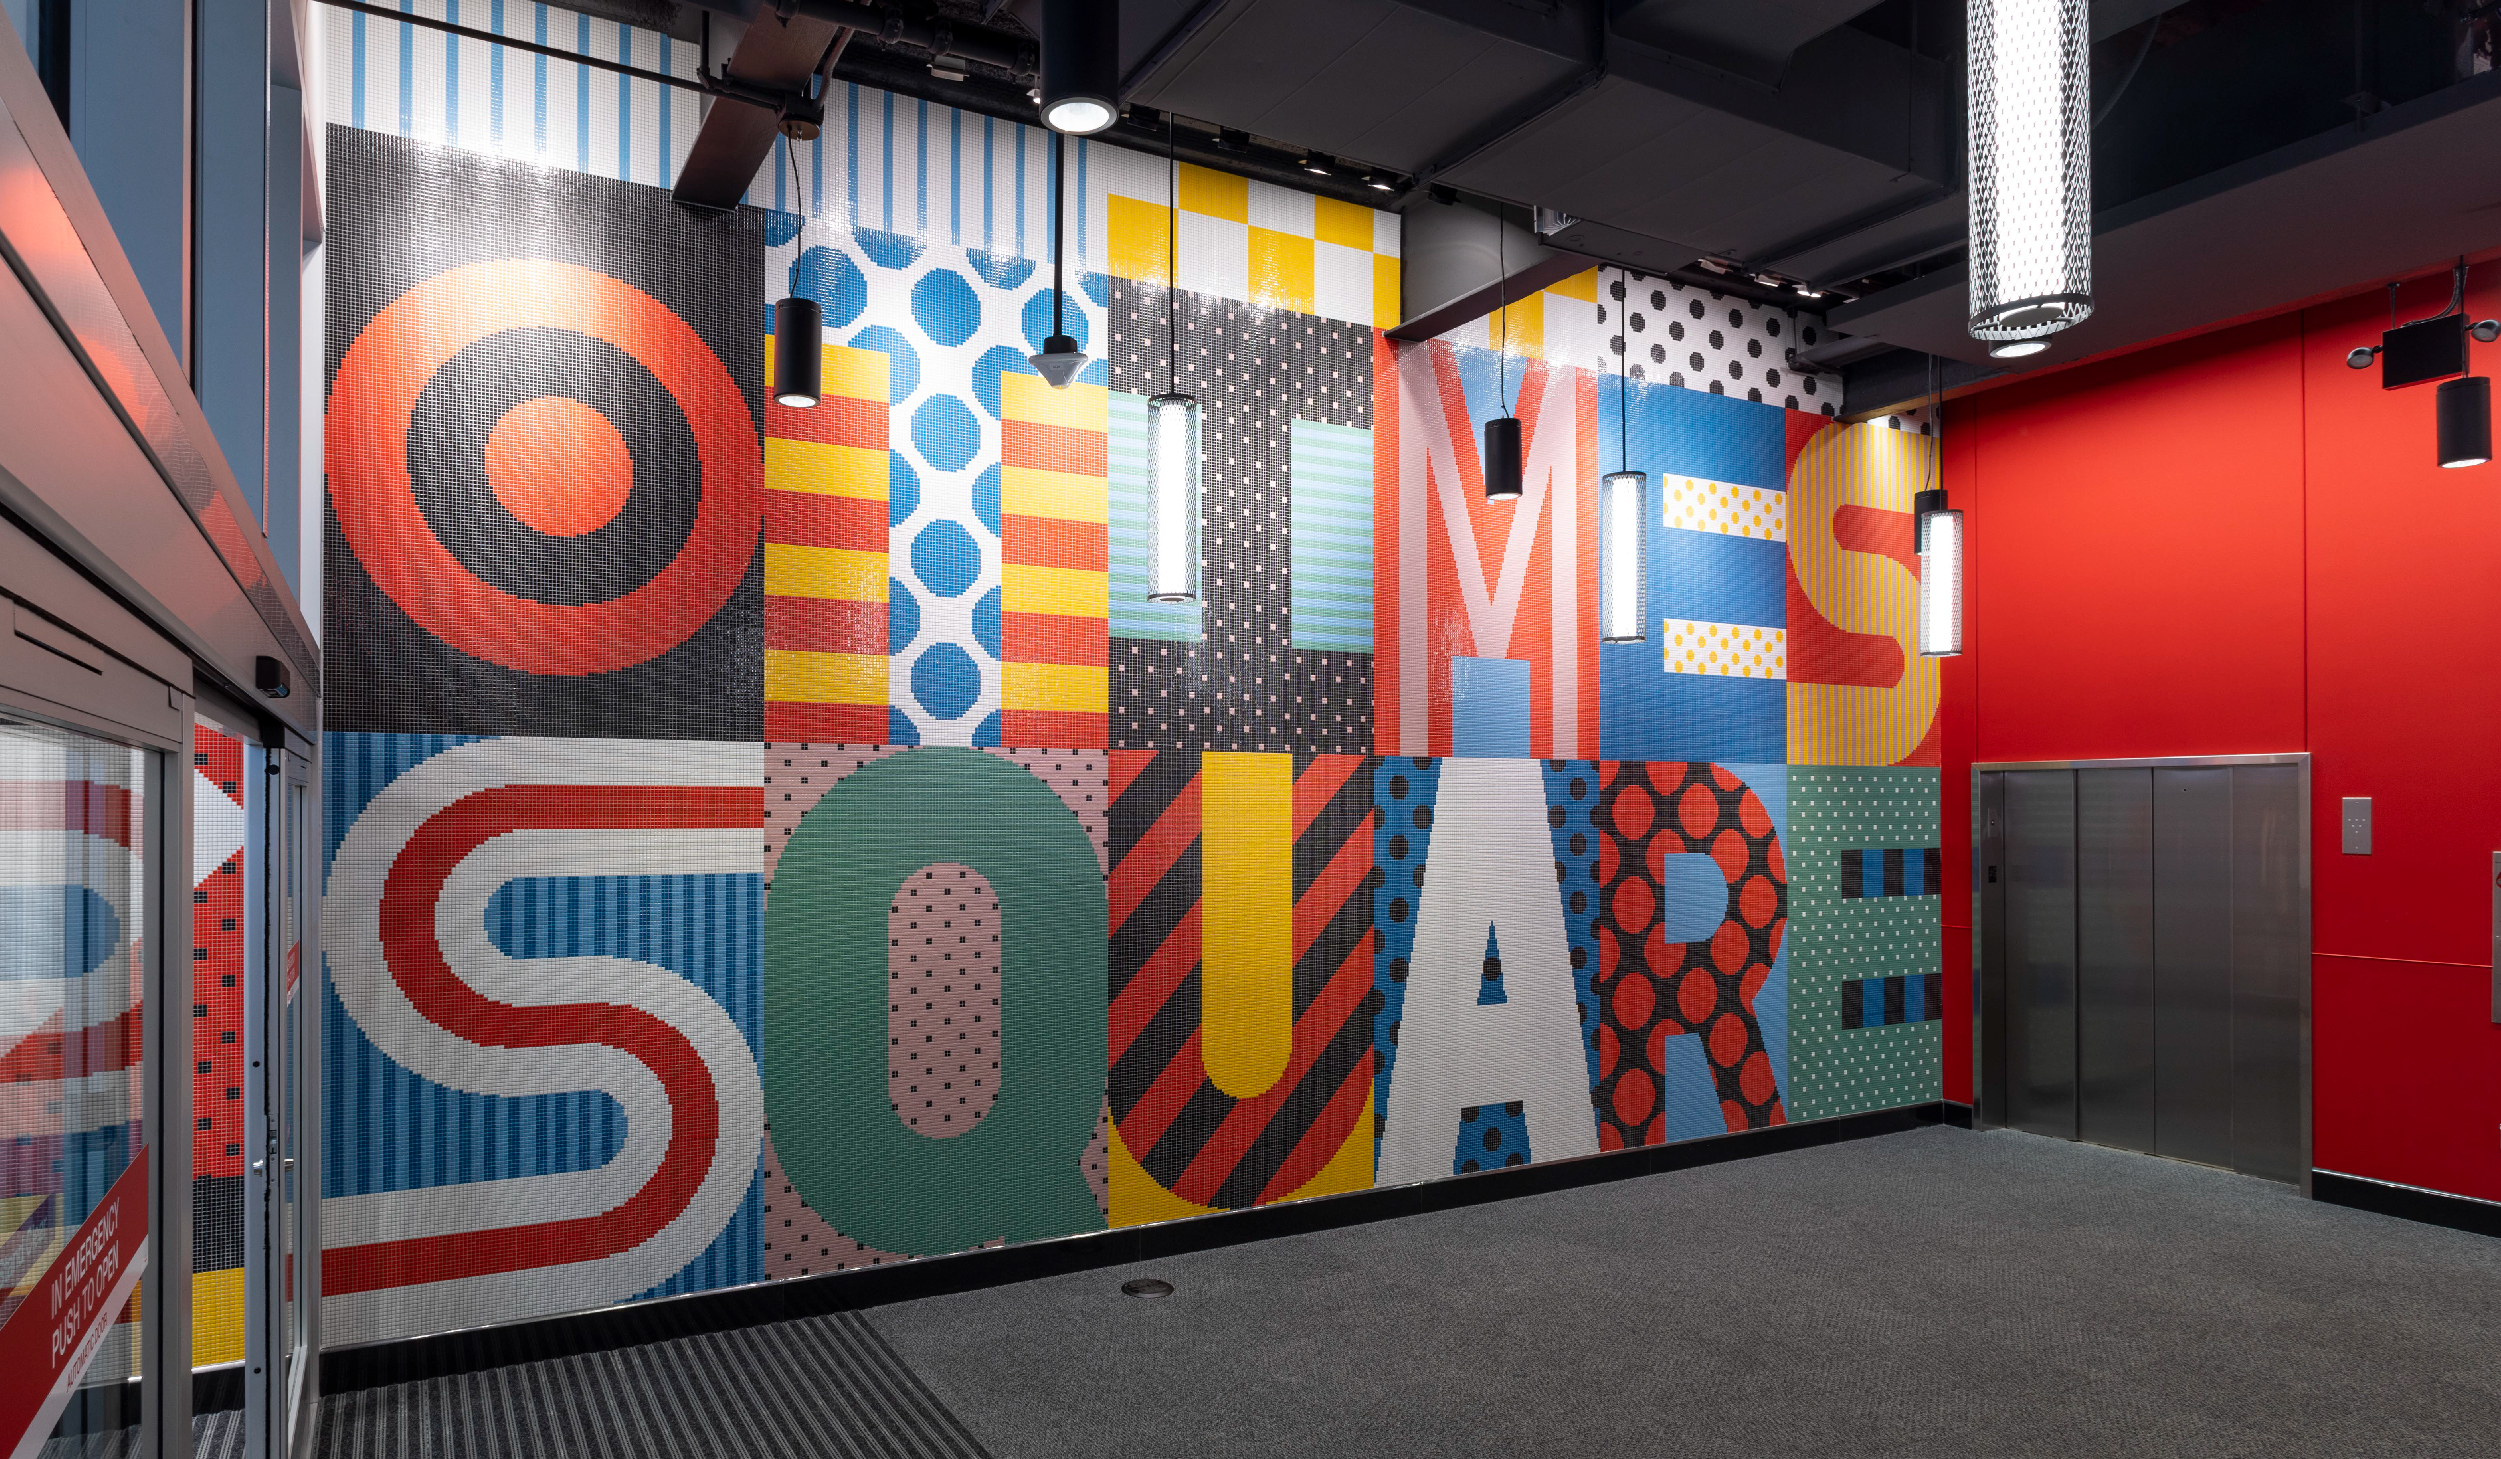 Multicolored tiles spell out “Times Square” on a large wall.